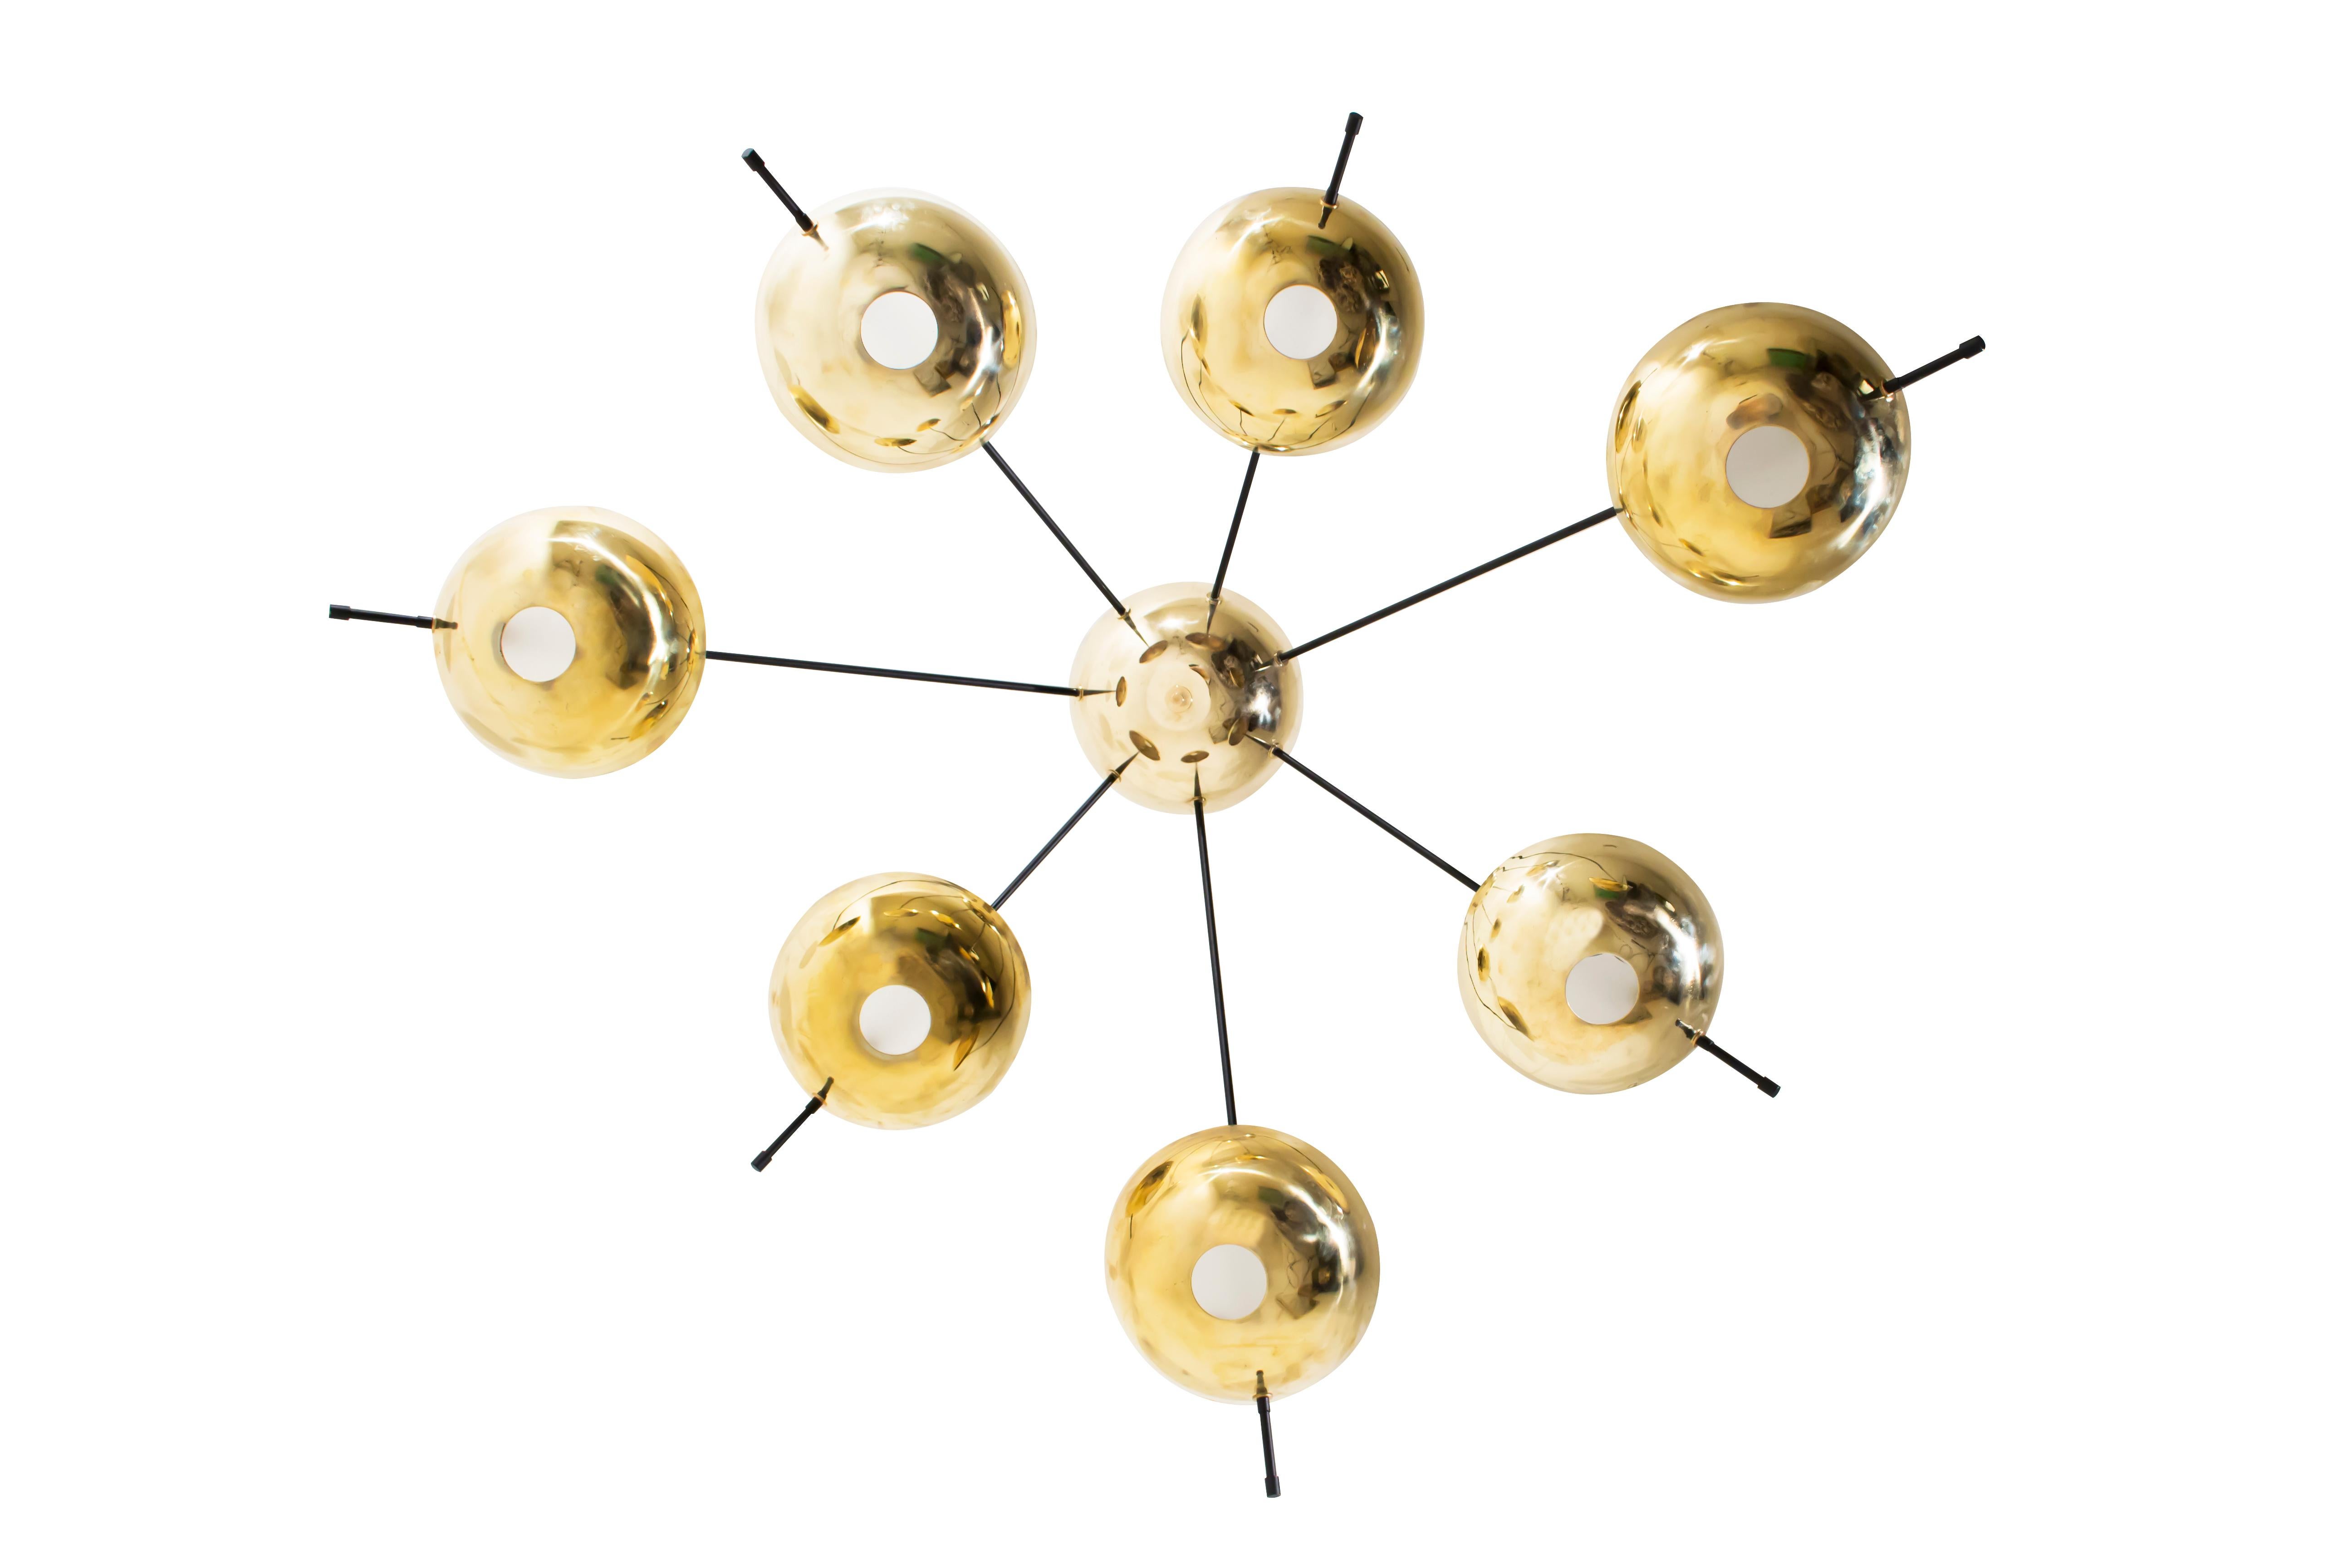 Made to order chandelier
Brass bowls
Black metal rods
7 light points
Contemporary, Italy.